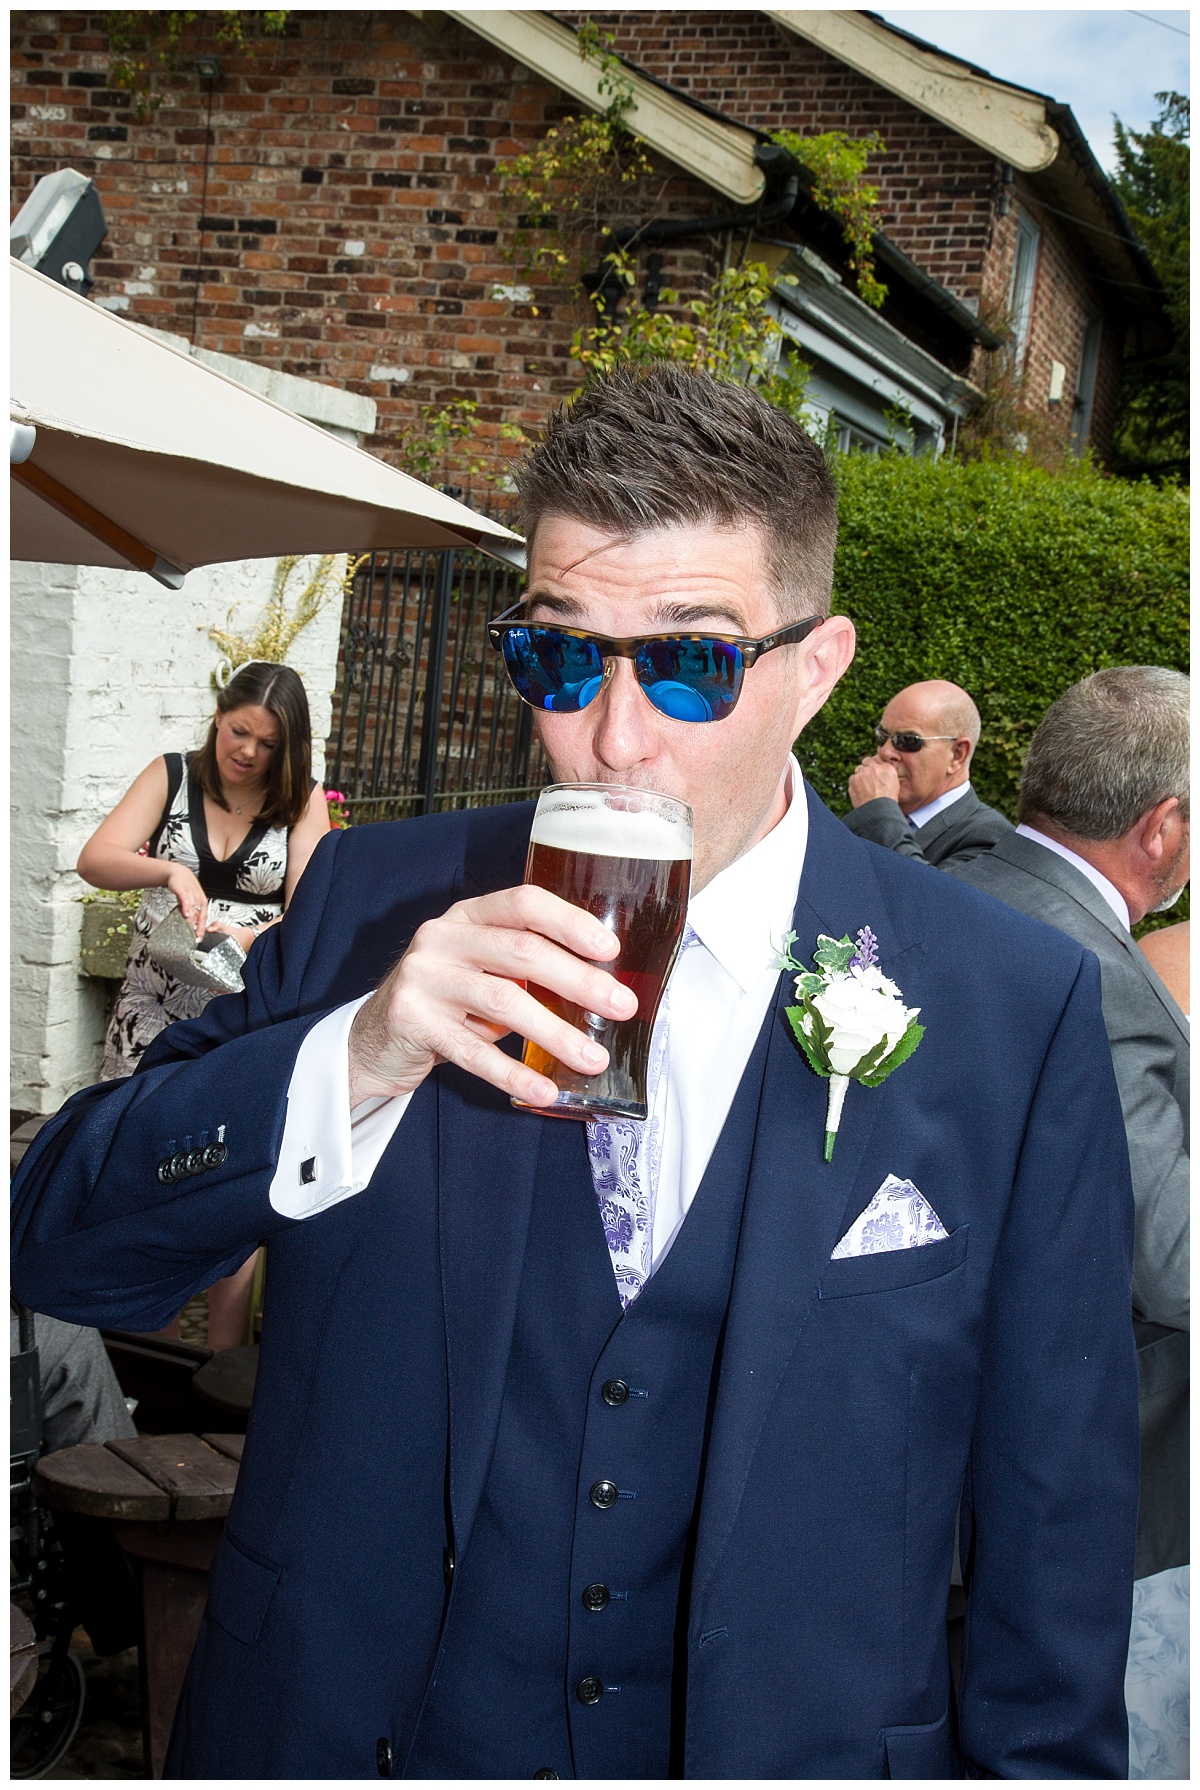 Wedding Photography Manchester - Sarah and Dave's Mottram Hall Wedding Day. 16